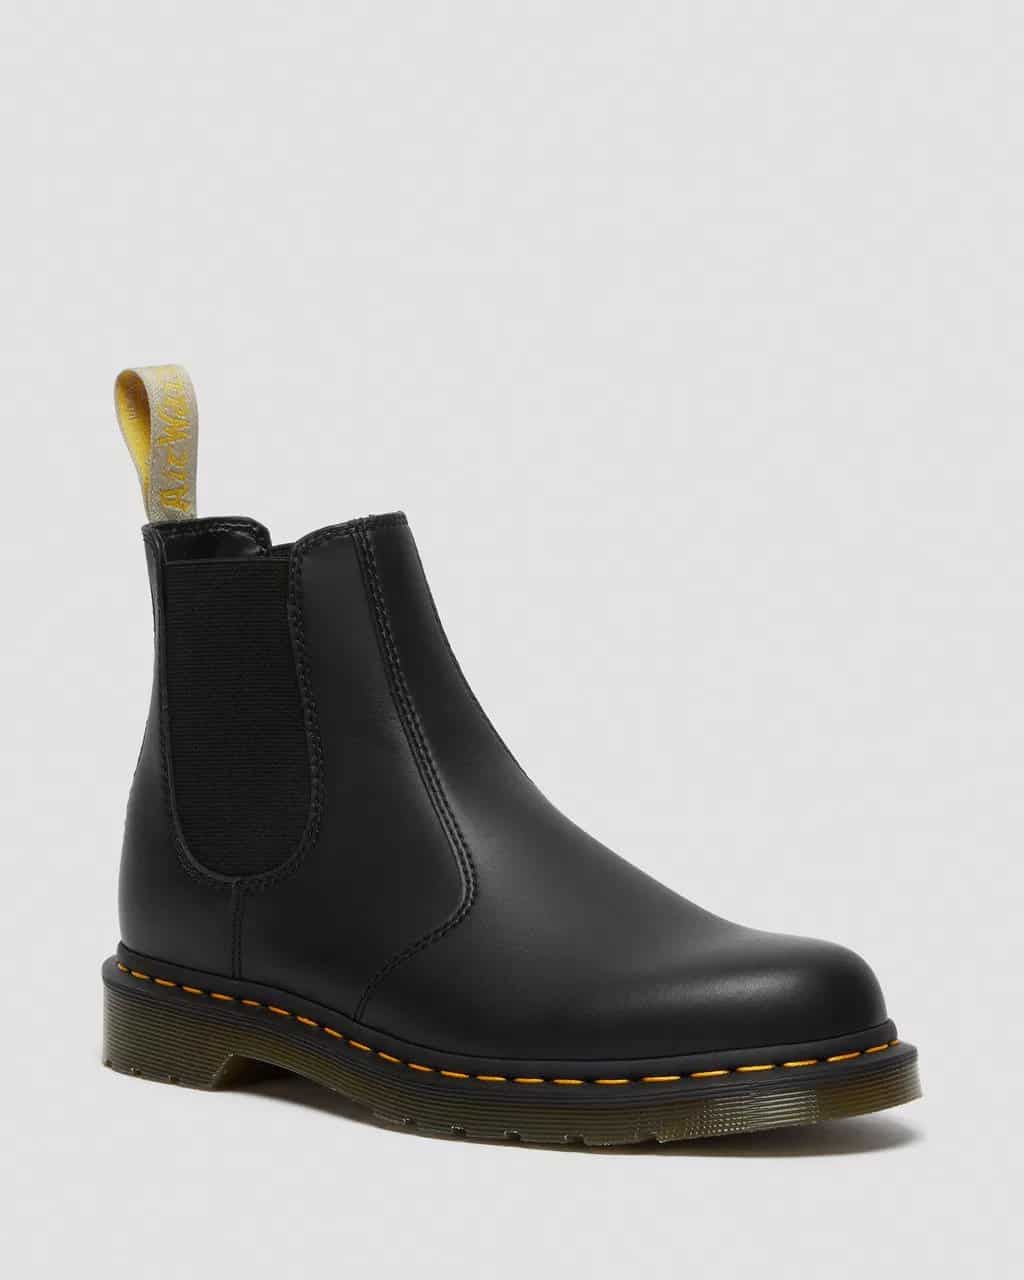 Dr Martens Vegan Chelsea Boots: The Top Classic, Classy Chelseas for ...